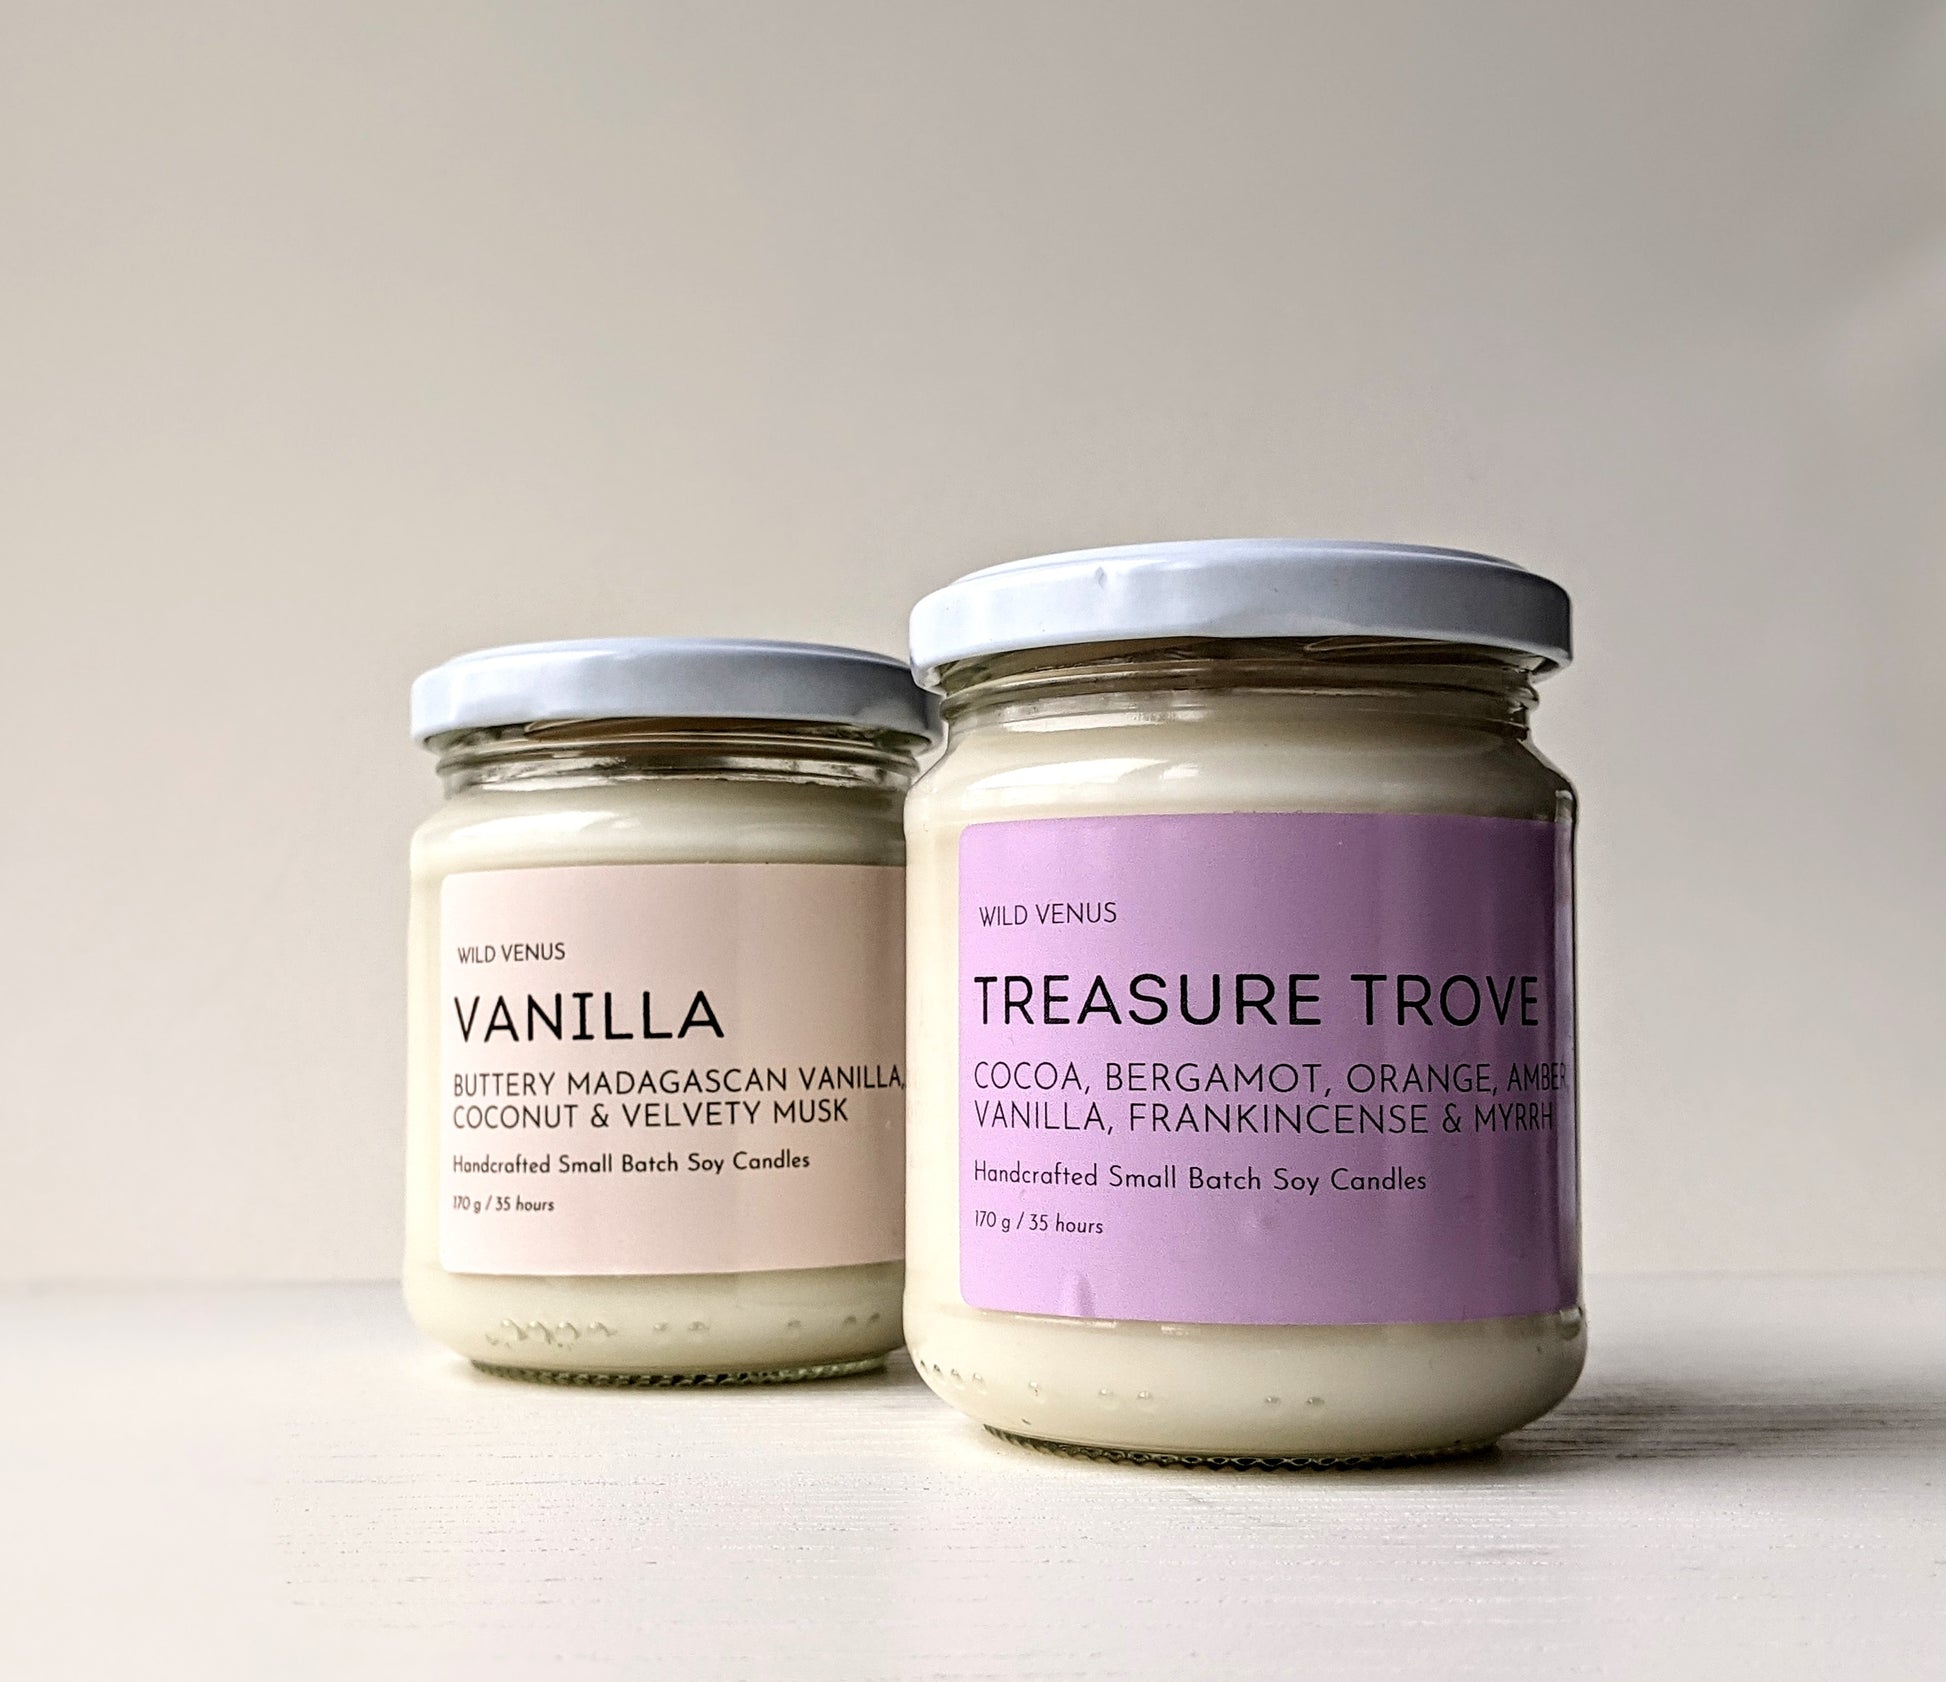 A vanilla candle is behind a treasure trove candle.